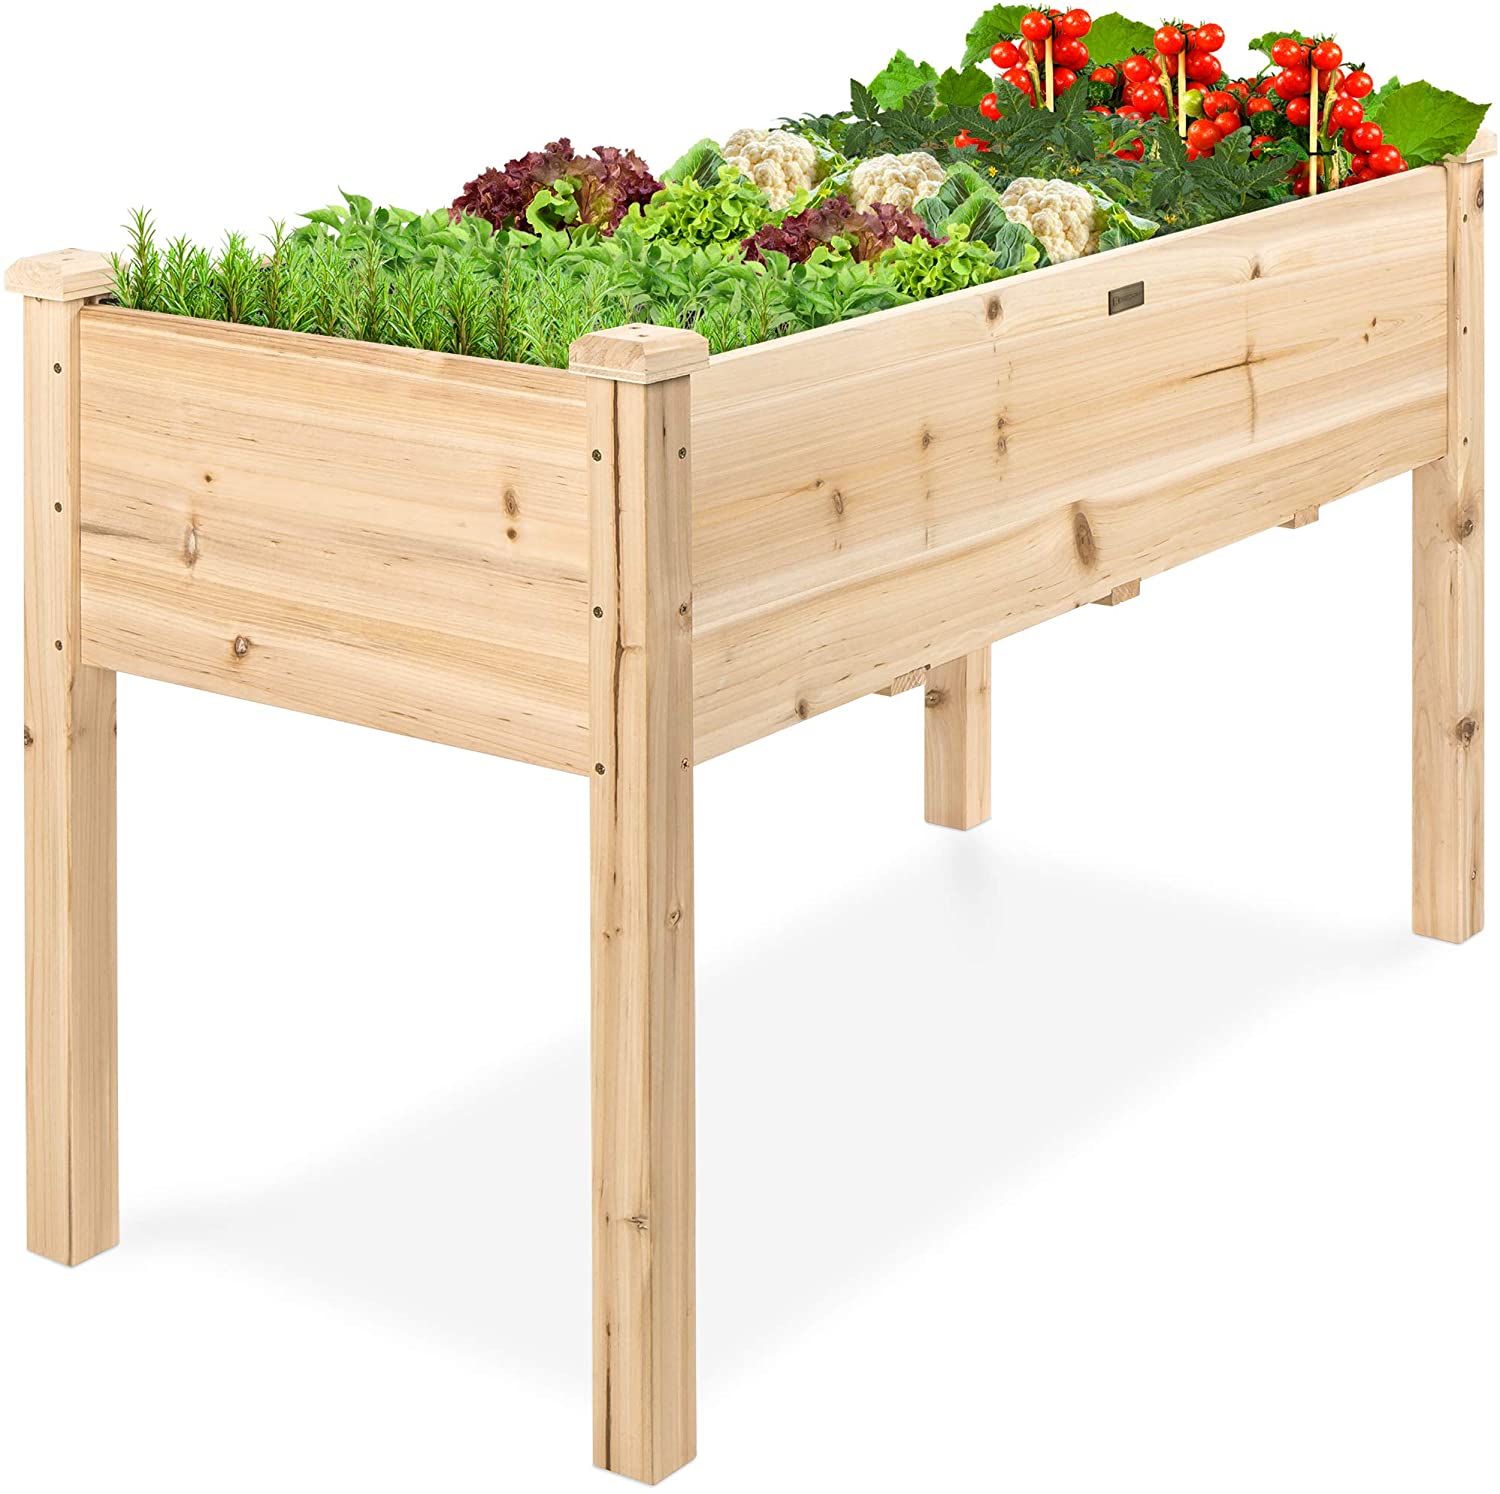 Best Choice Products Raised Garden Bed 48x24x30in